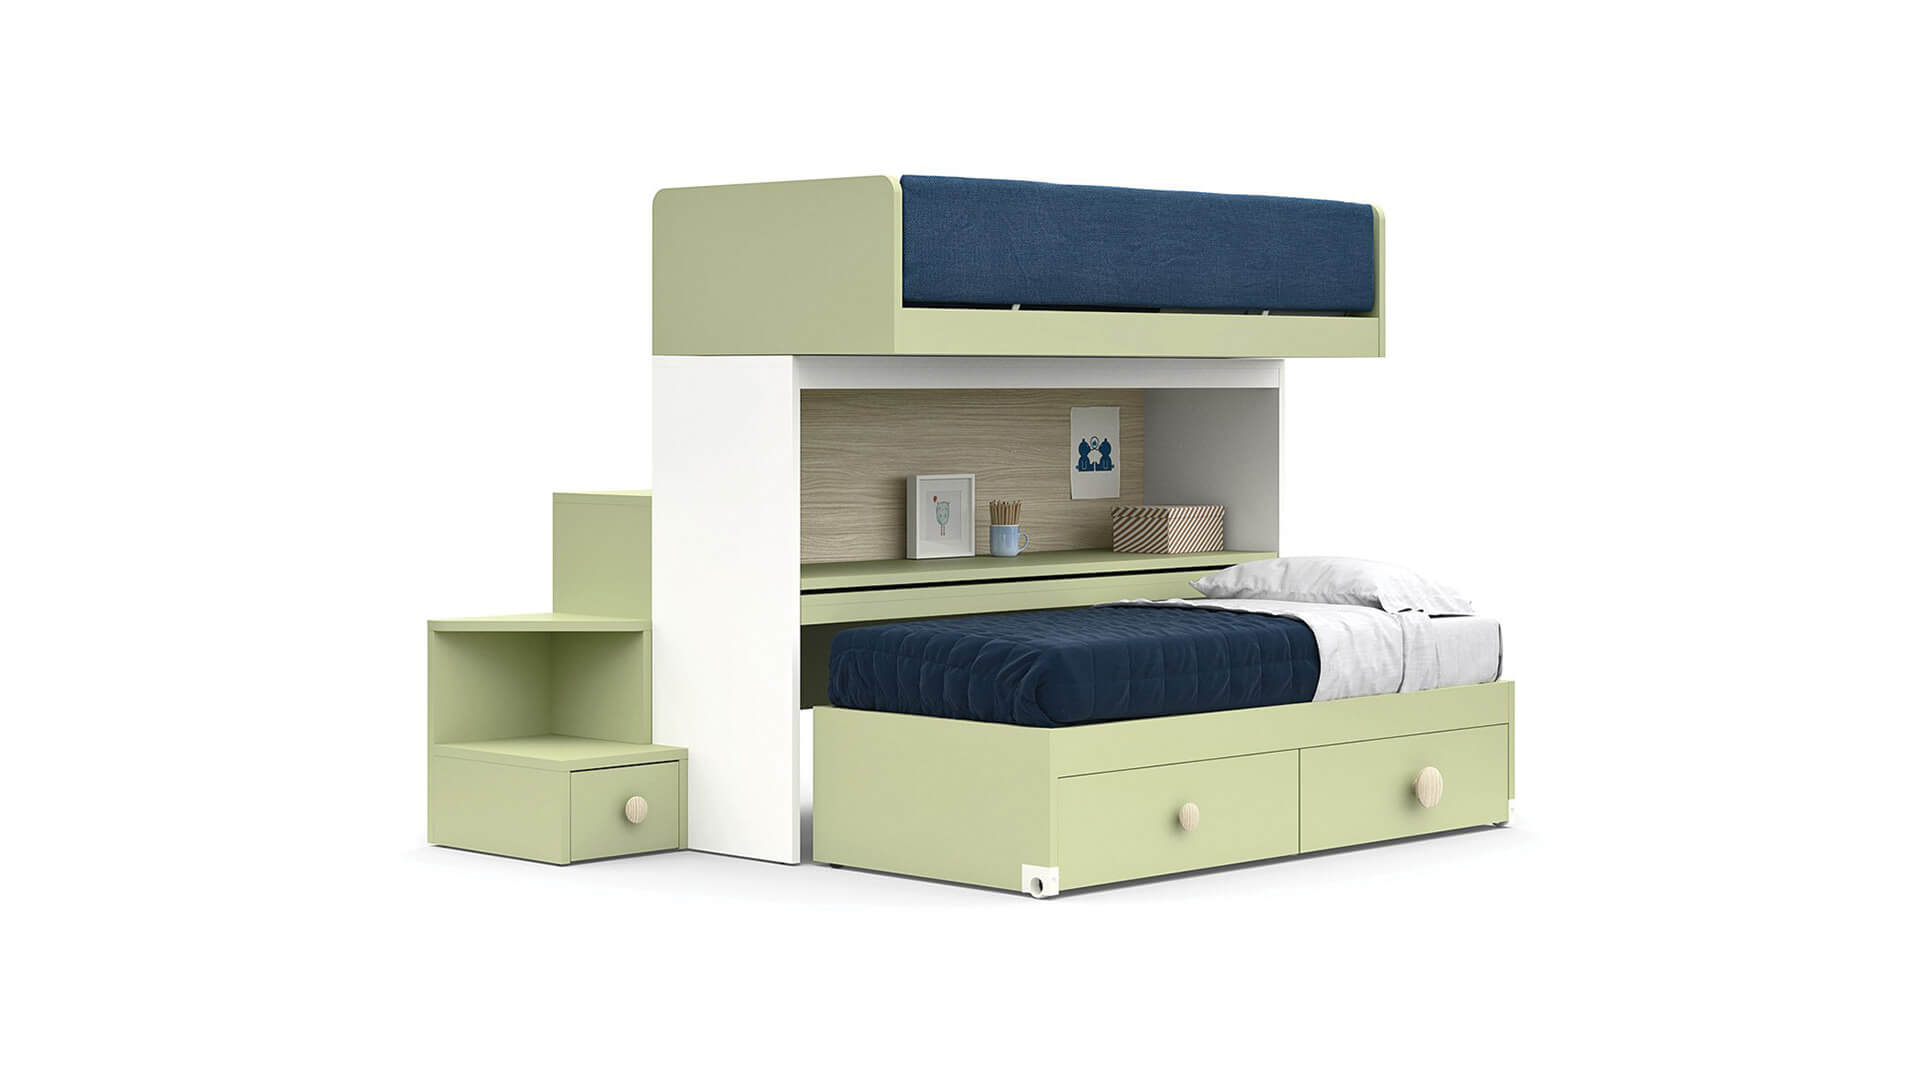 Blog IDW - Bunk beds: the proposals from Nidi